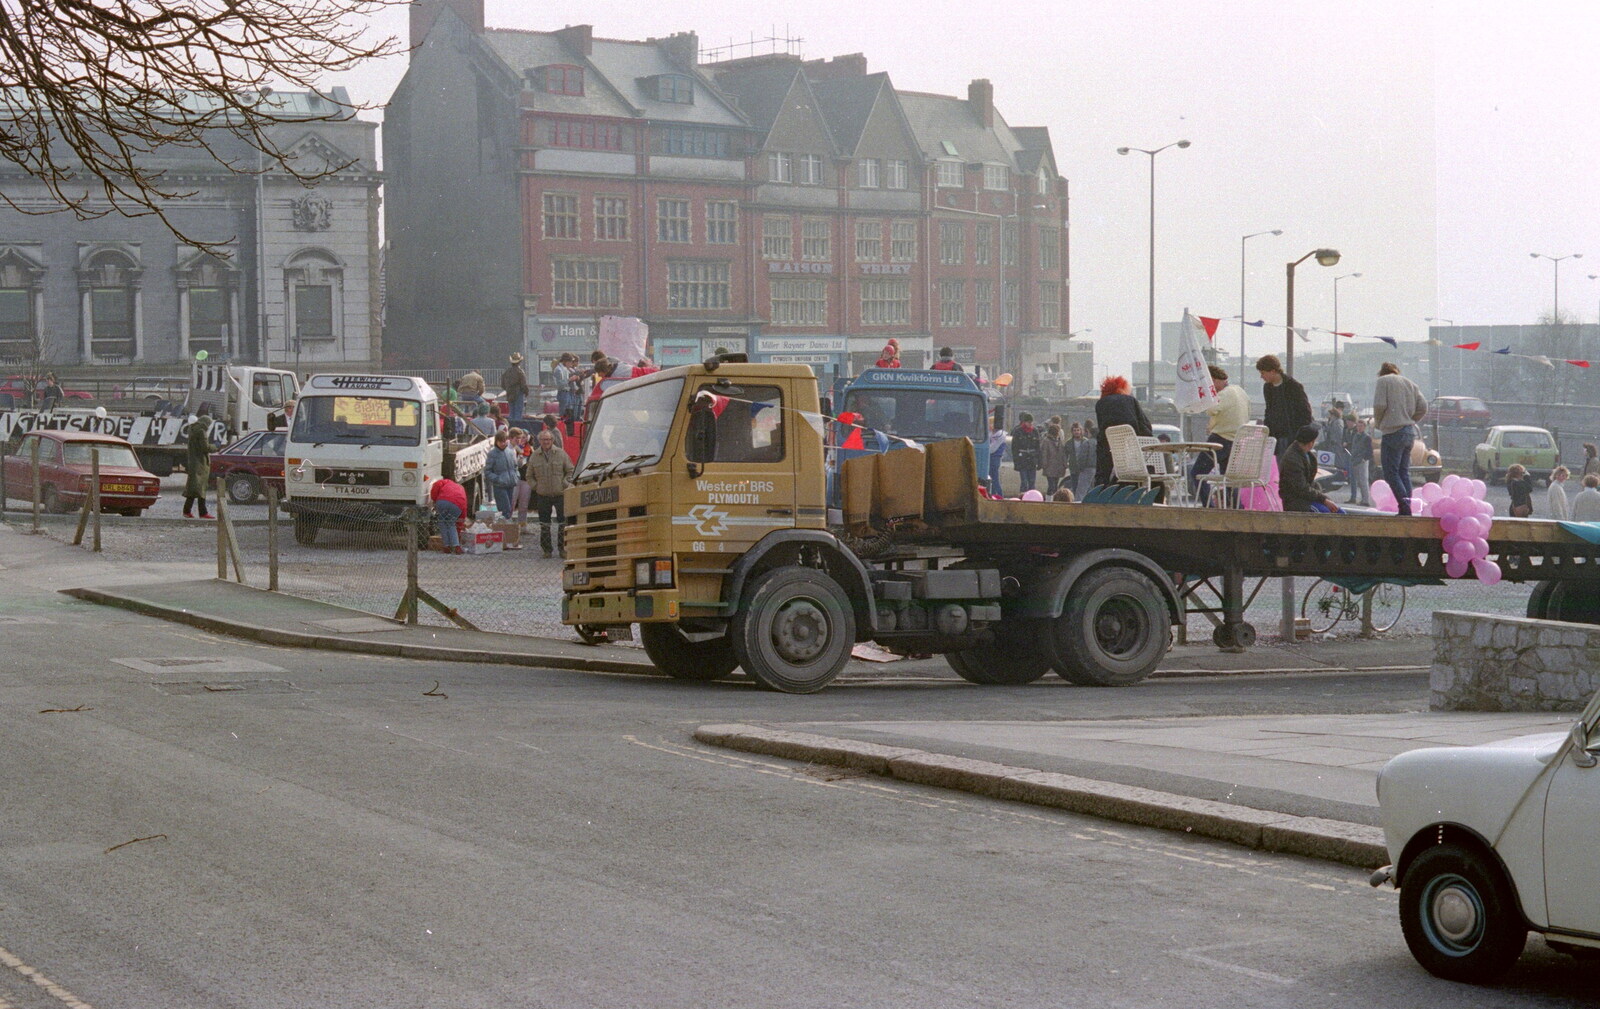 Floats assemble by the Glanville Street car park from Uni: PPSU "Jazz" RAG Street Parade, Plymouth, Devon - 17th February 1986